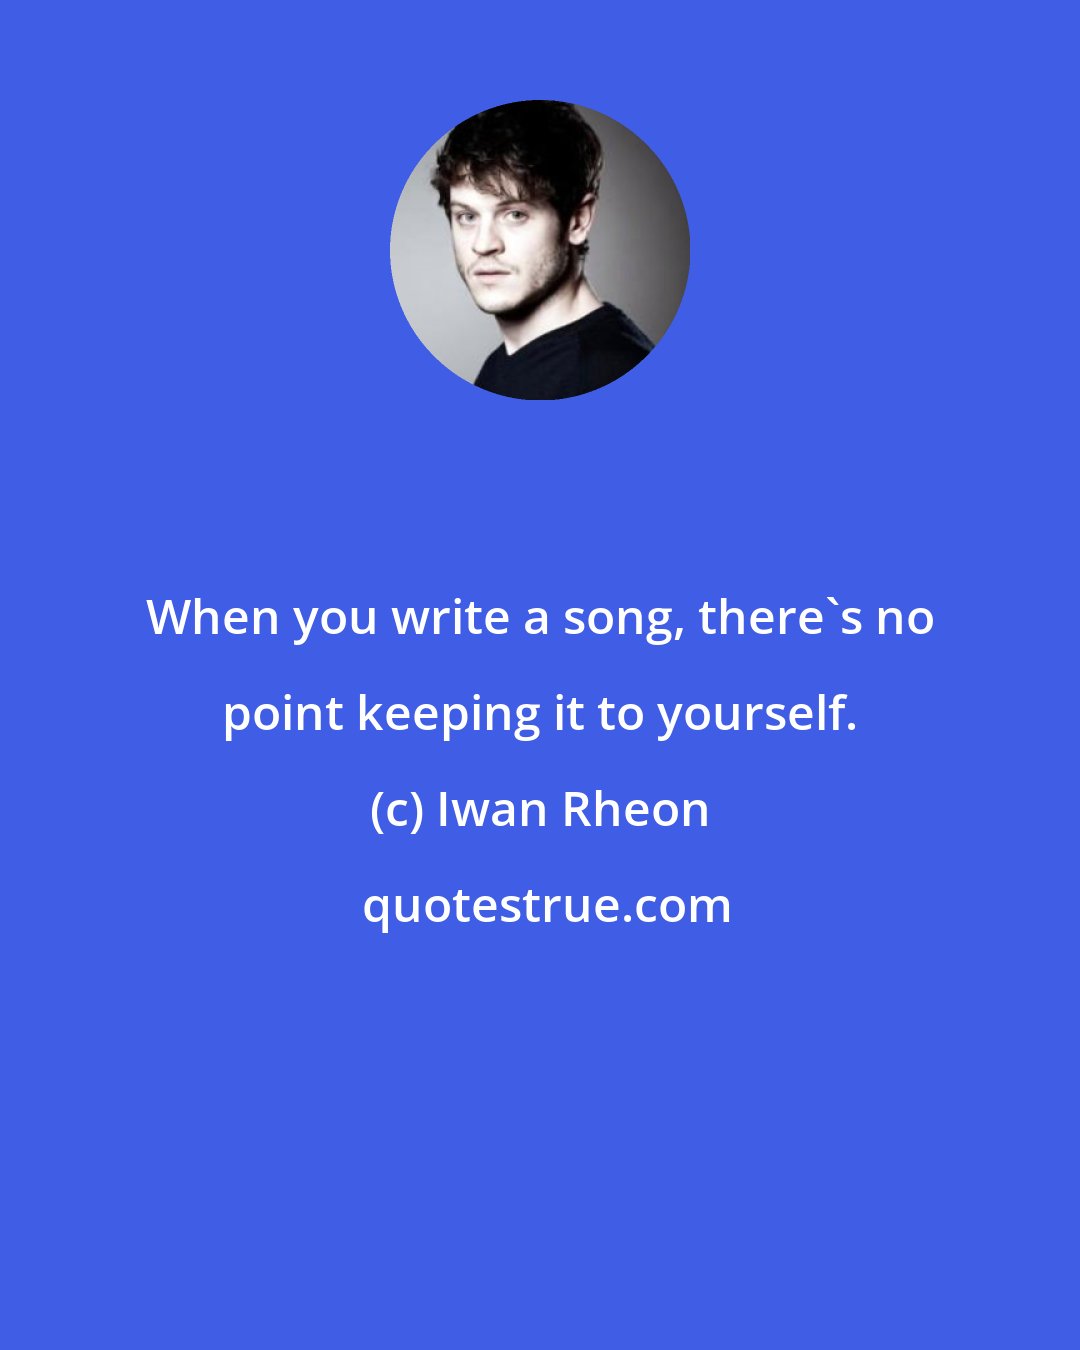 Iwan Rheon: When you write a song, there's no point keeping it to yourself.